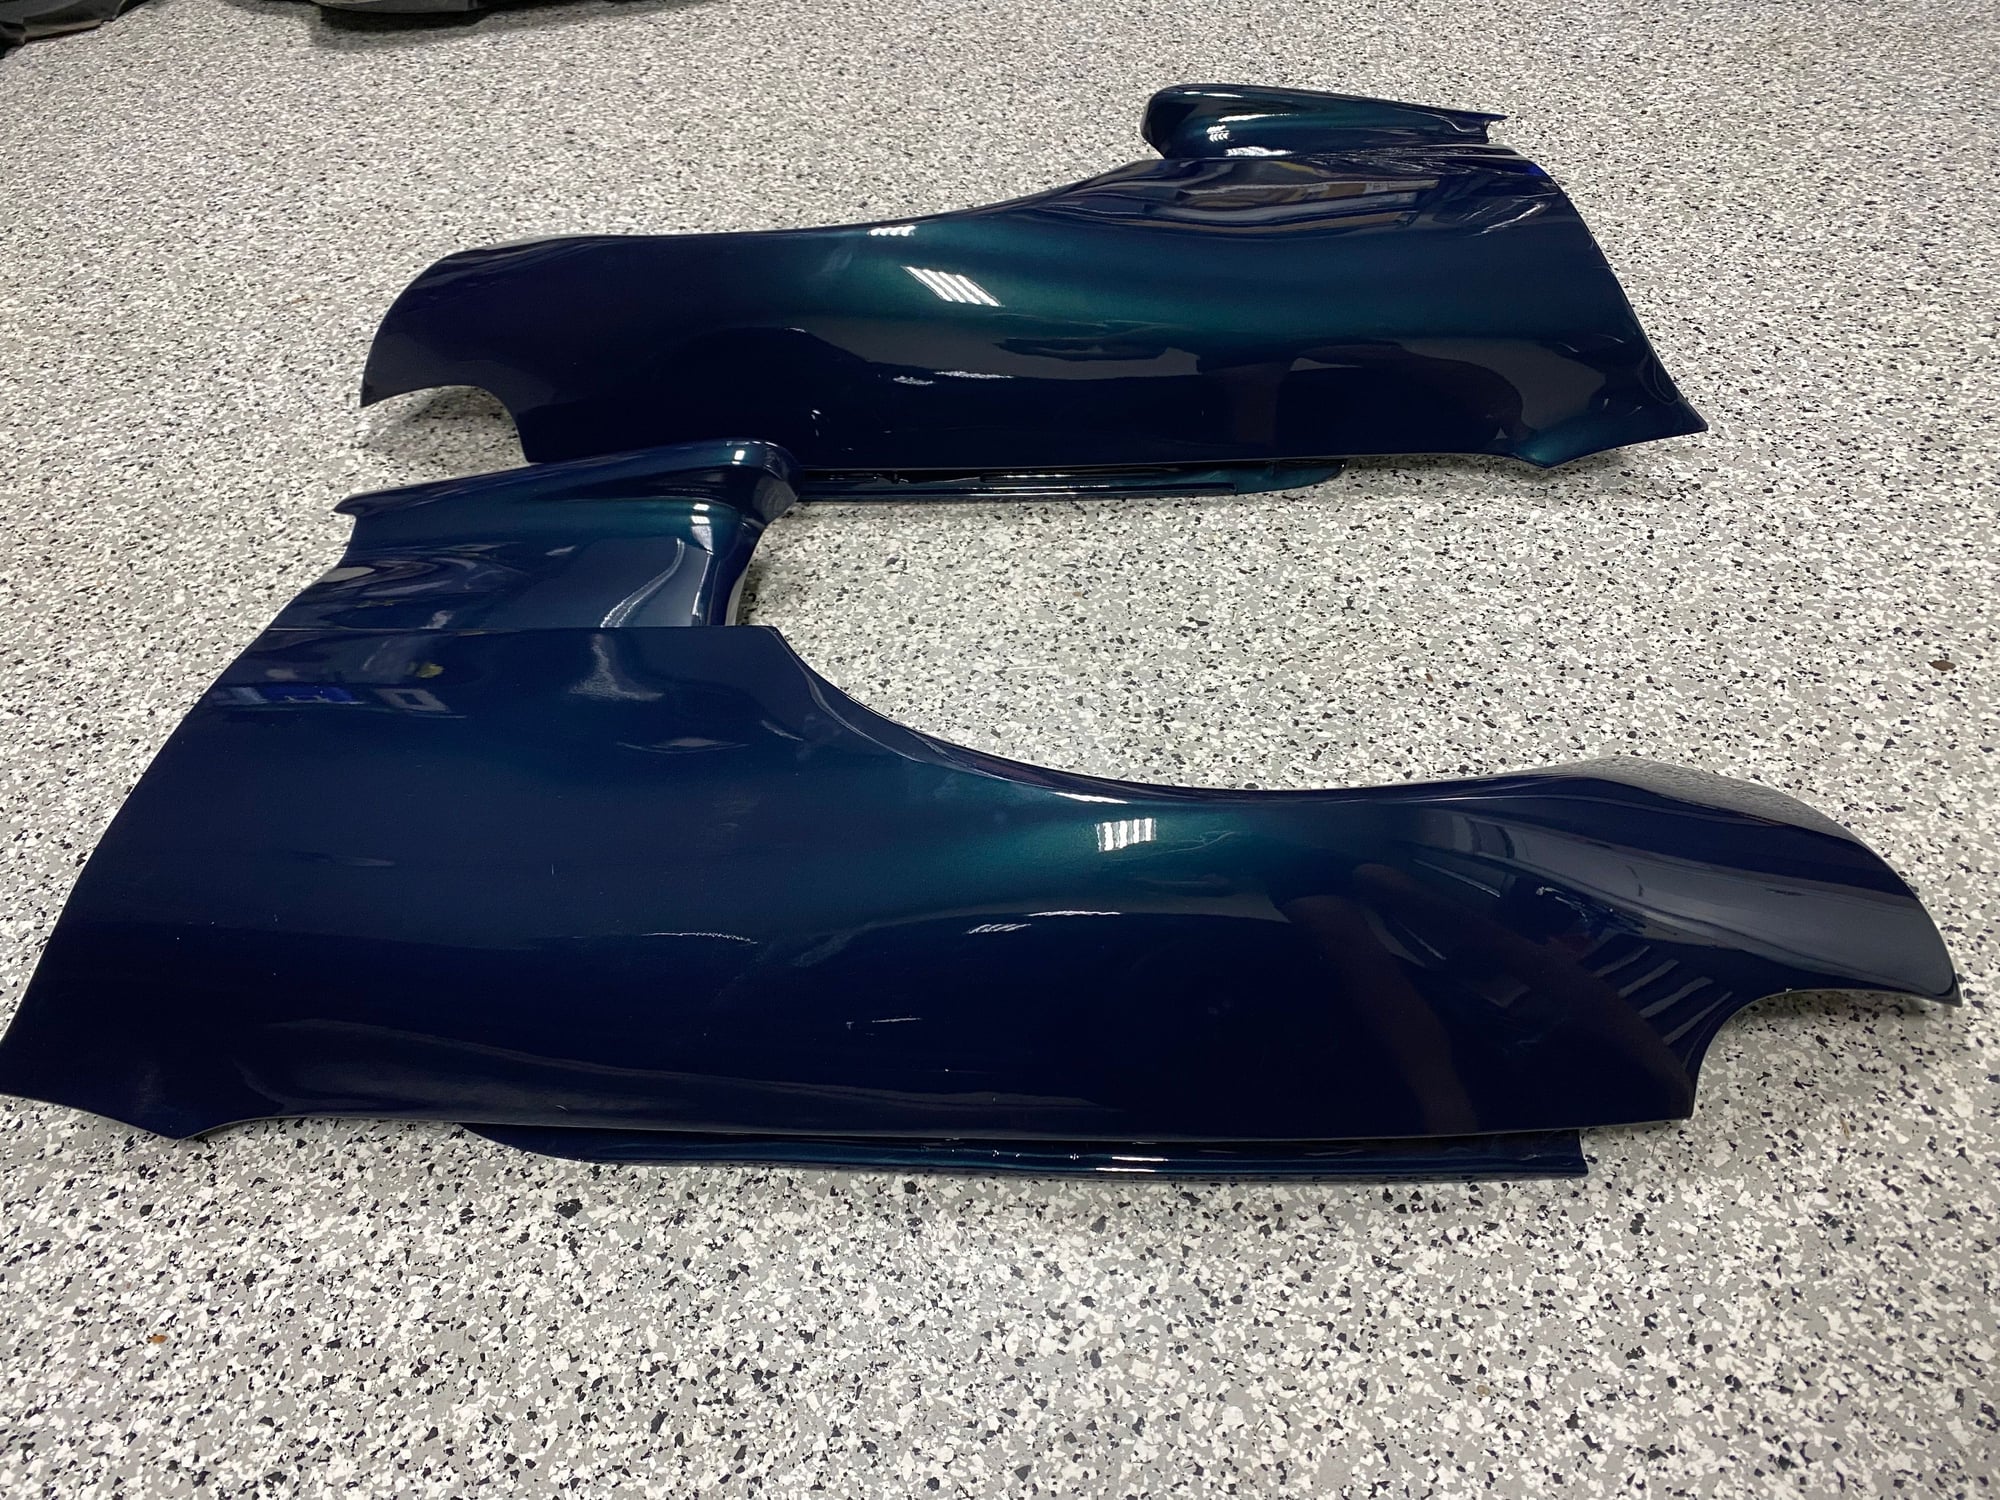 Exterior Body Parts - Genuine FEED front fenders ( MONTEGO BLUE) - New - 1993 to 1995 Mazda RX-7 - Bend, OR 97701, United States